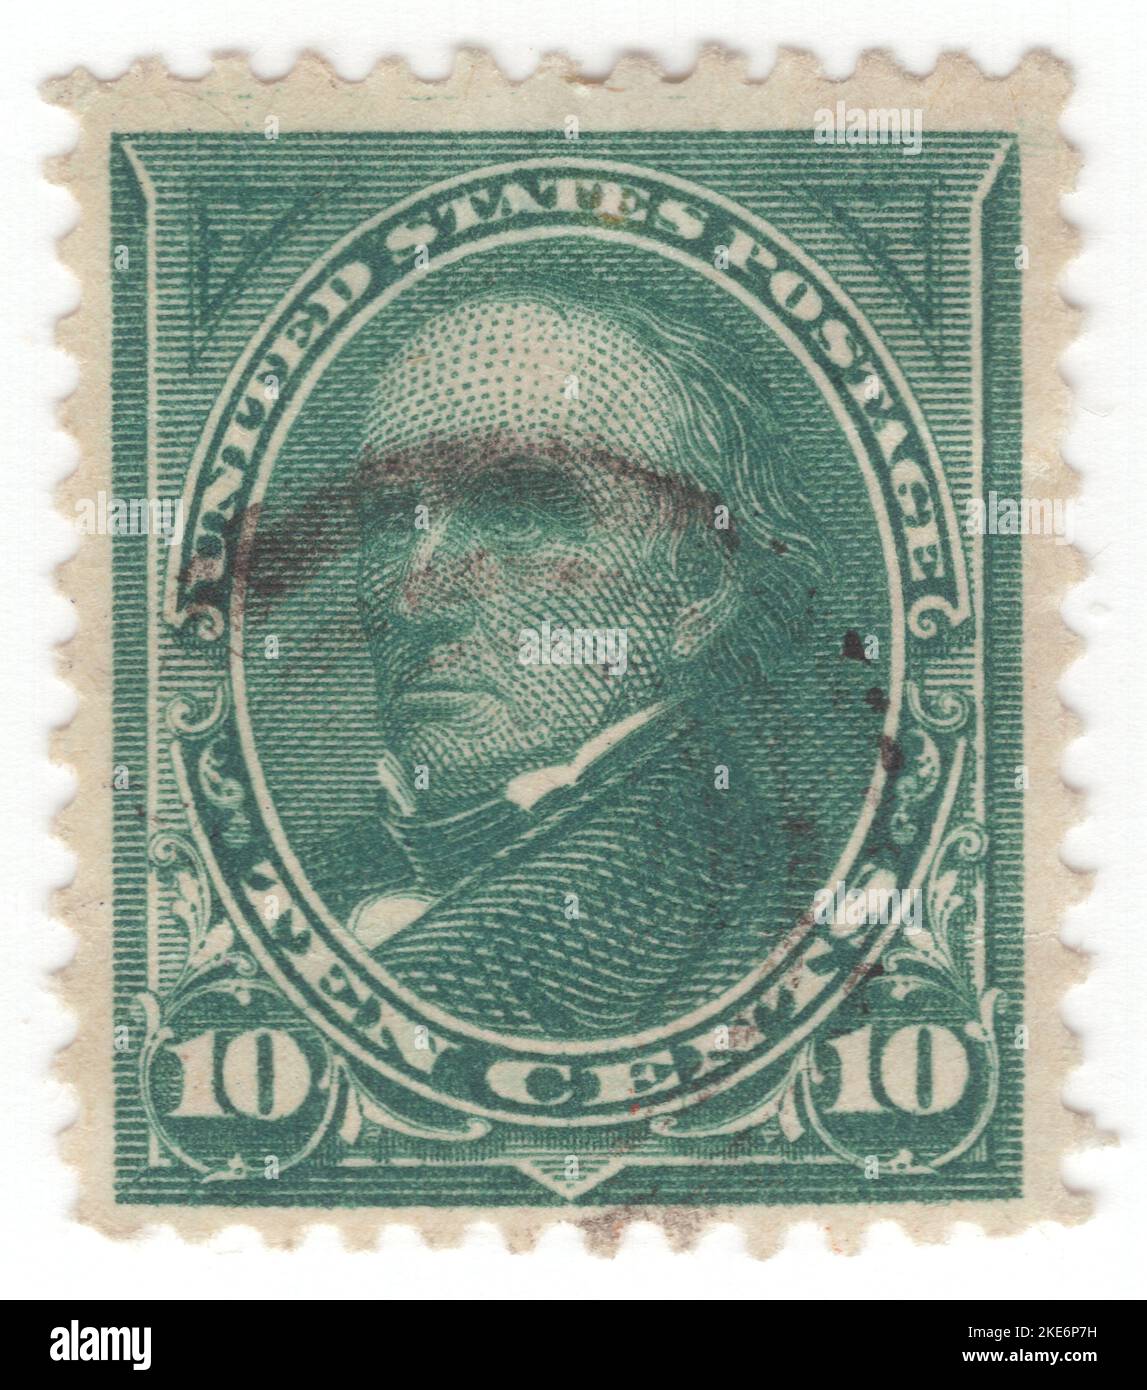 USA - 1895: An 10 cents dark green postage stamp depicting portrait of Daniel Webster, American lawyer and statesman who represented New Hampshire and Massachusetts in the U.S. Congress and served as the U.S. Secretary of State under Presidents William Henry Harrison, John Tyler, and Millard Fillmore. Webster was one of the most prominent American lawyers of the 19th century, and argued over 200 cases before the U.S. Supreme Court between 1814 and his death in 1852. During his life, he was a member of the Federalist Party, the National Republican Party, and the Whig Party Stock Photo